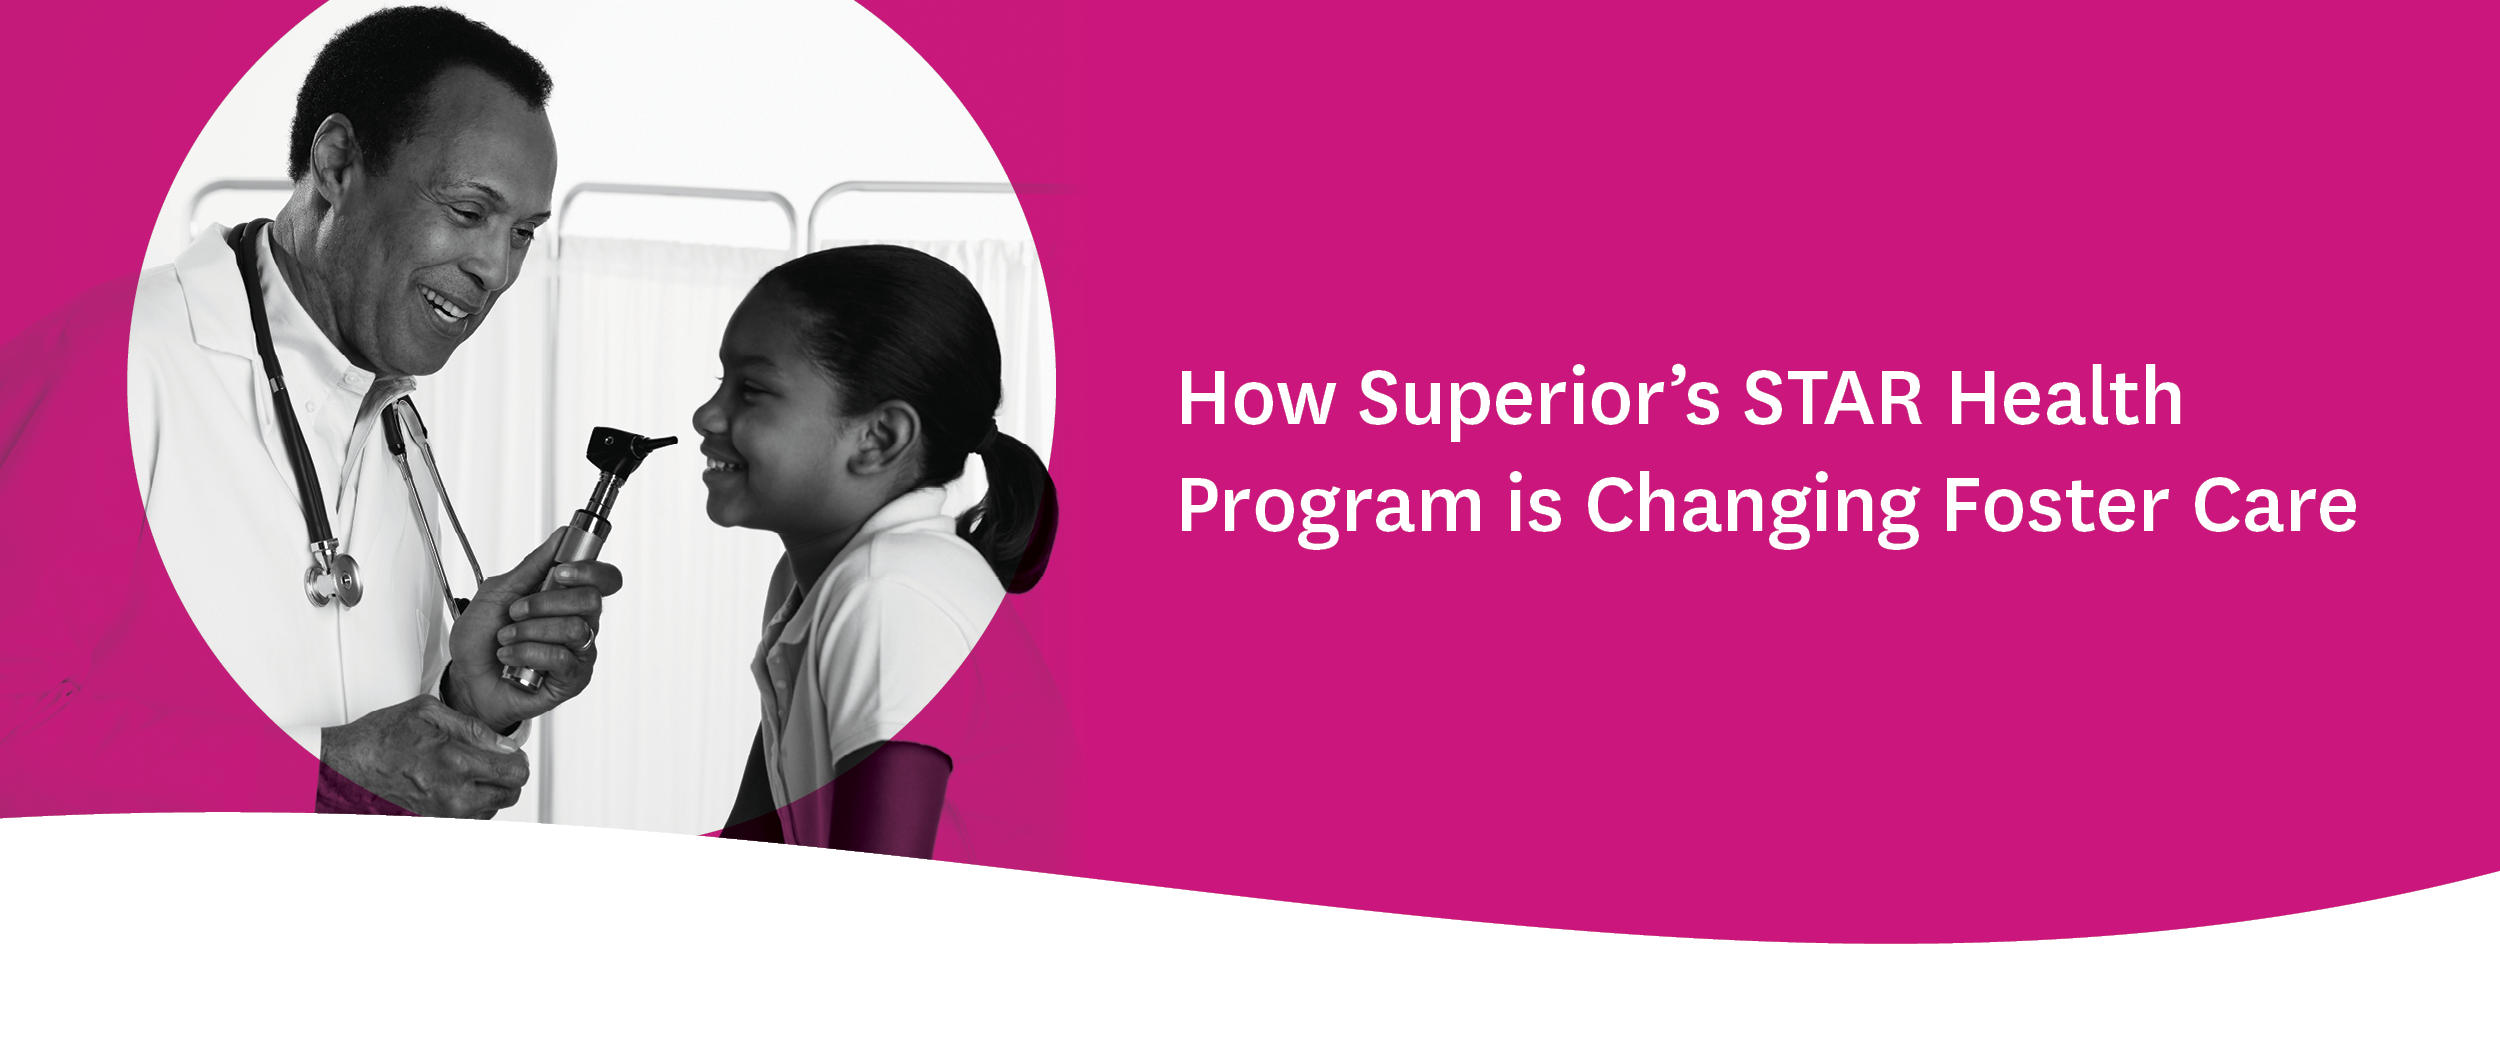 How Superior's STAR Health Program is Changing Foster Care